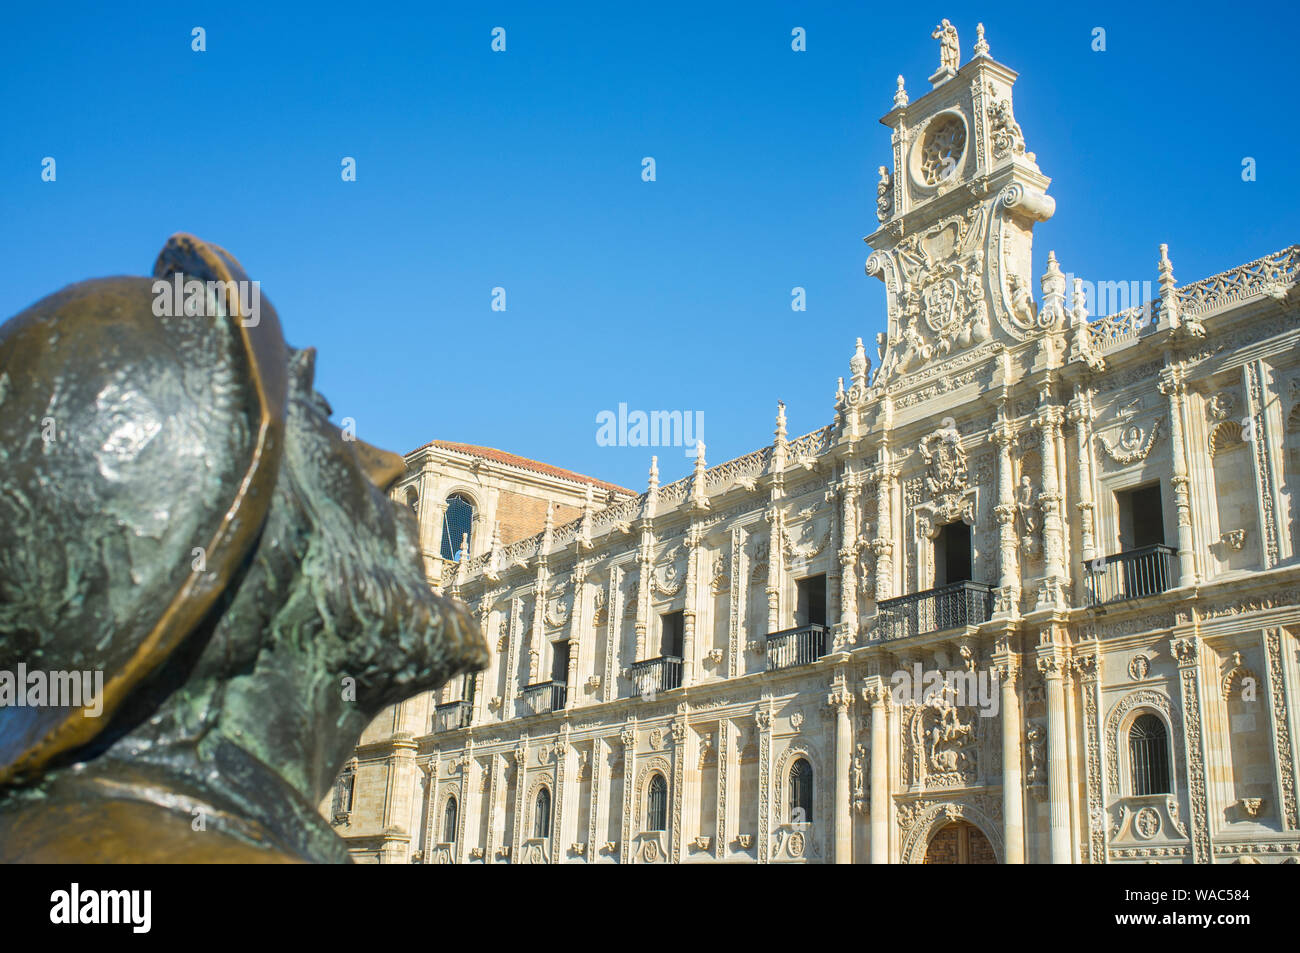 Leon, Spain - June 26th, 2019: Monument To The Pilgrim at San Marcos Square, Leon City, Castile and Leon, Spain Stock Photo